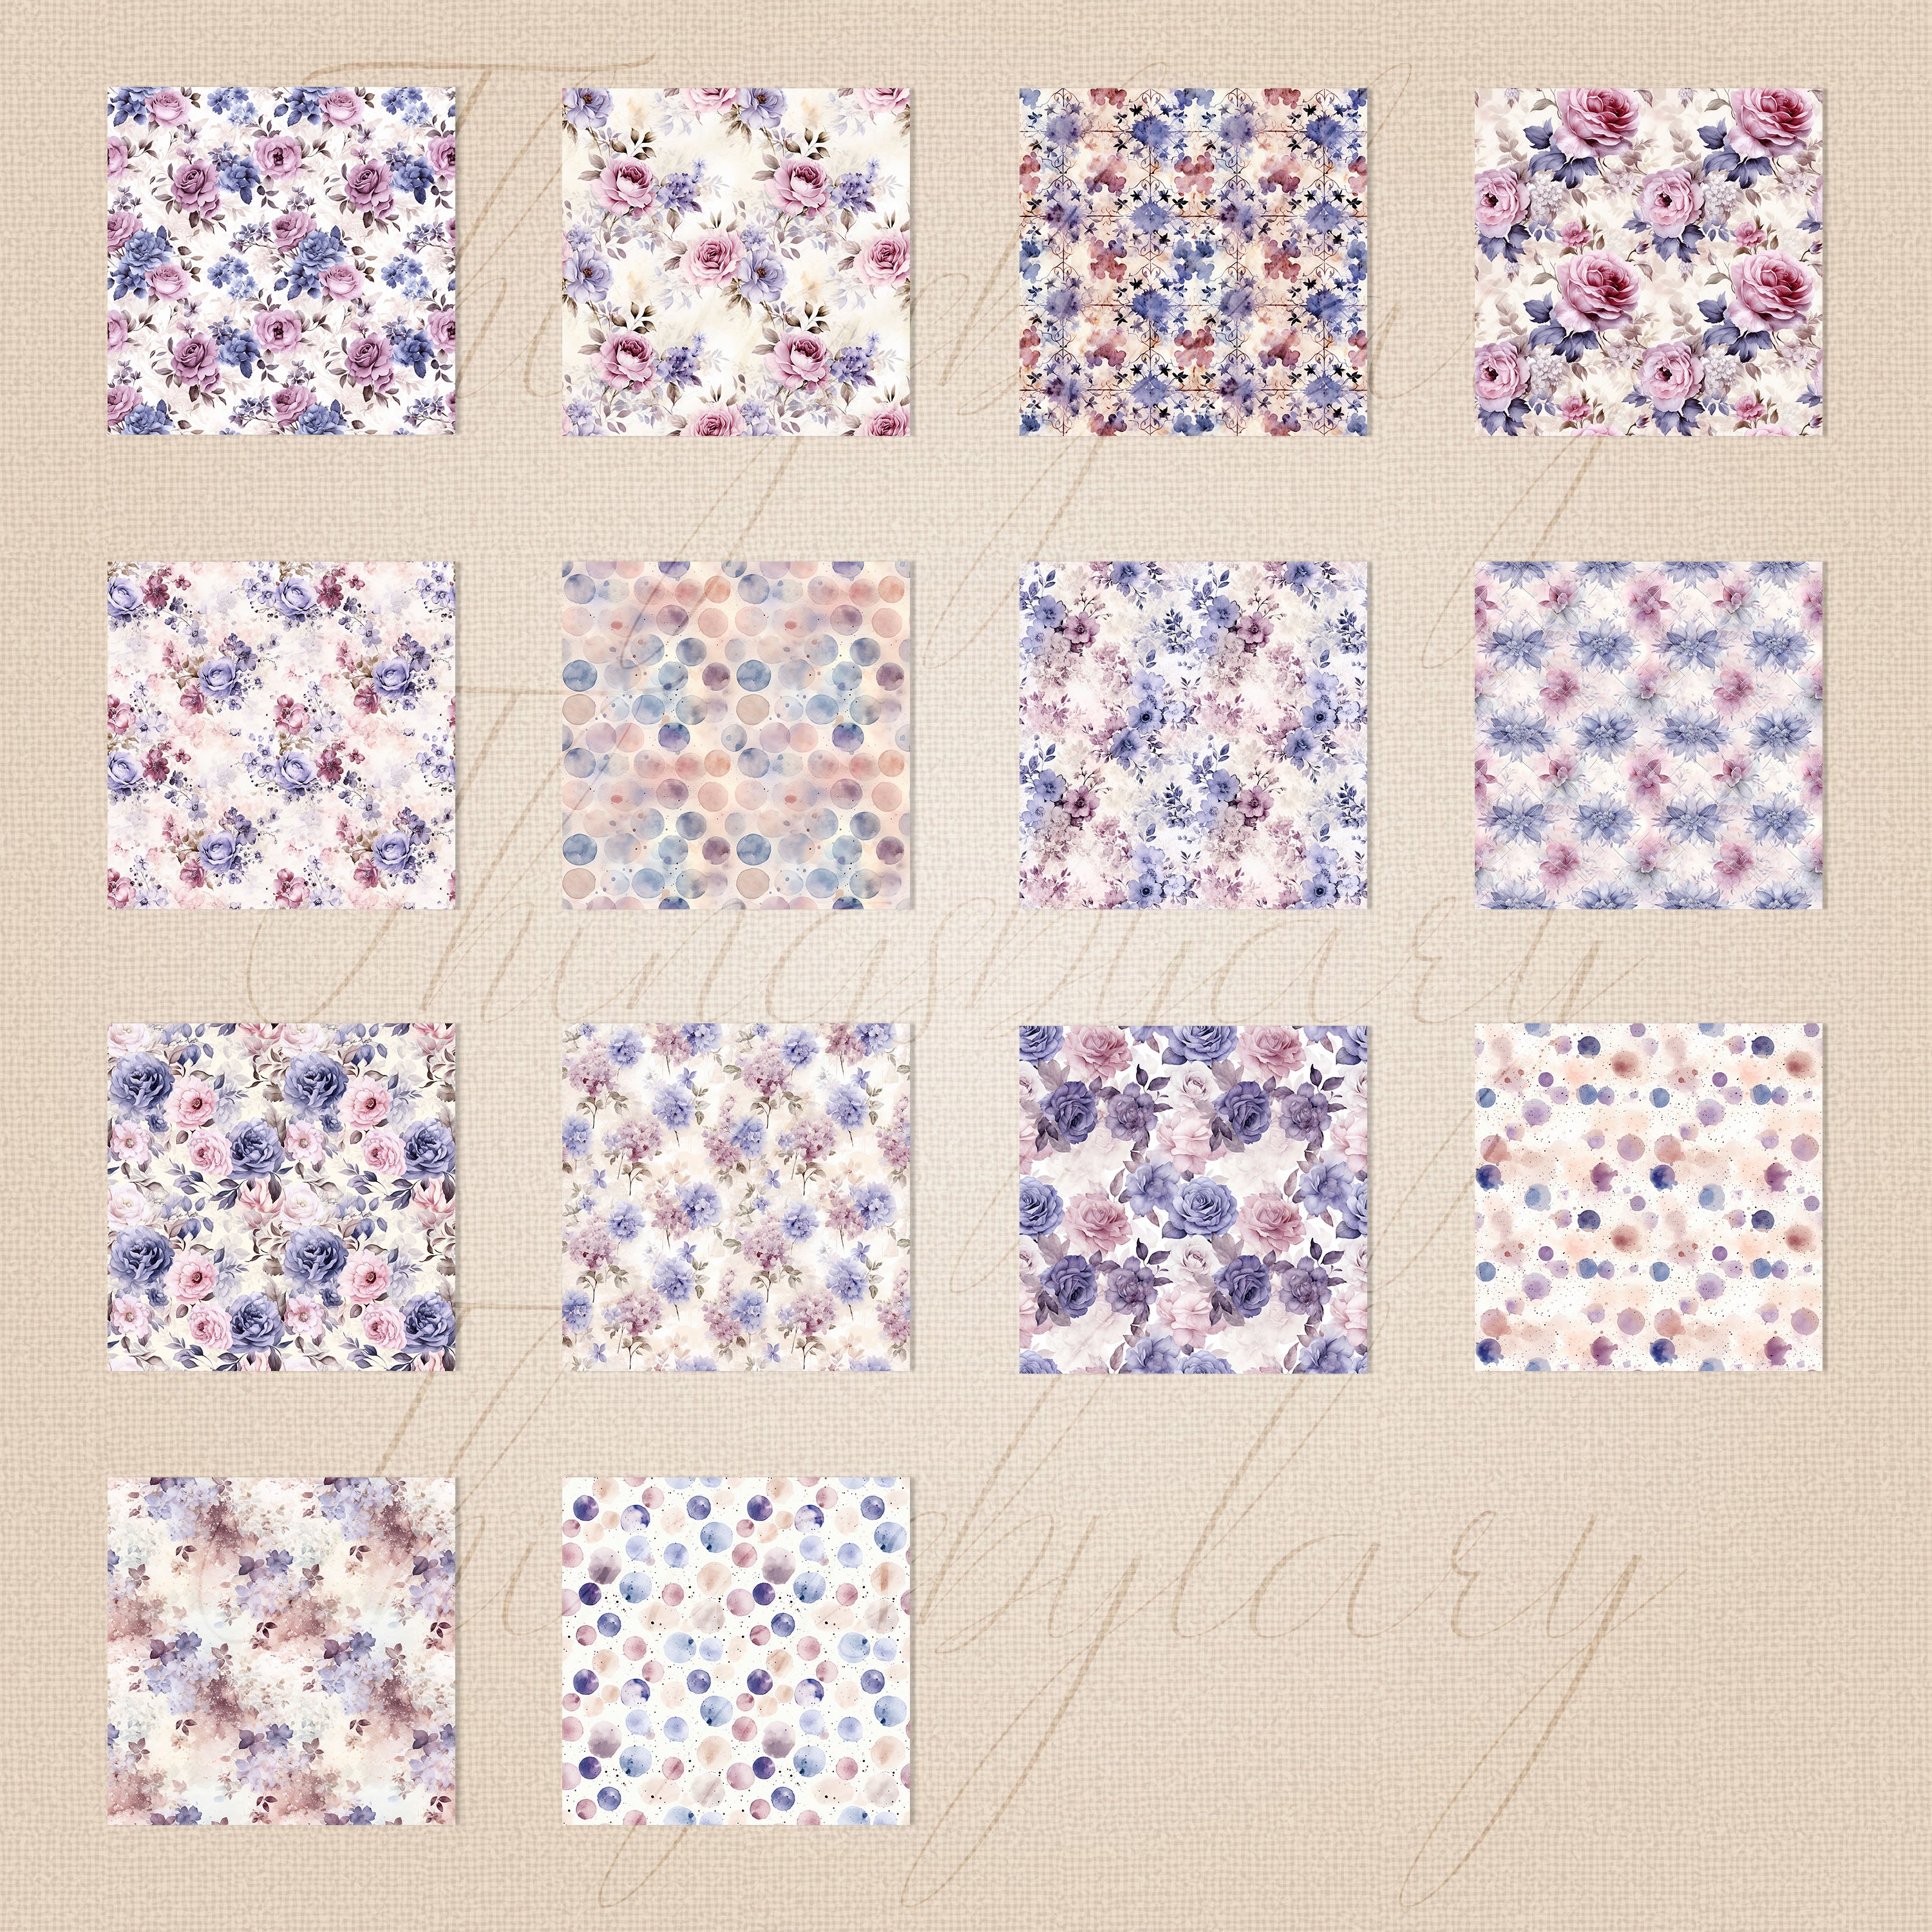 28 Seamless Vintage Romantic Purple Shabby Chic Roses Polka Dots Digital Papers